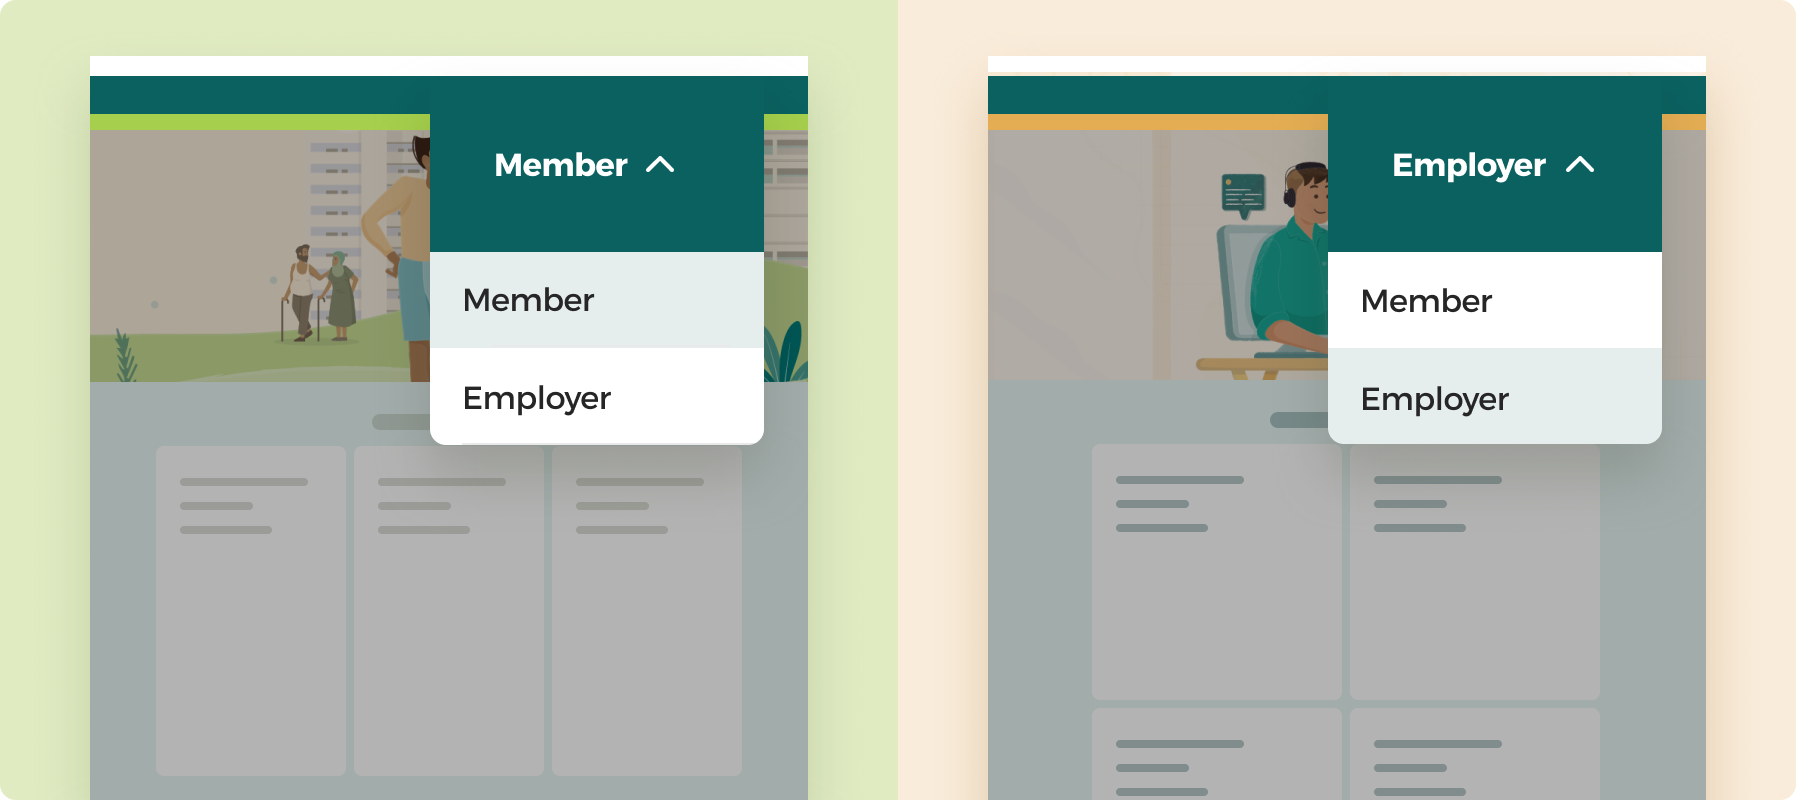 Toggle between Member and Employer portals from anywhere